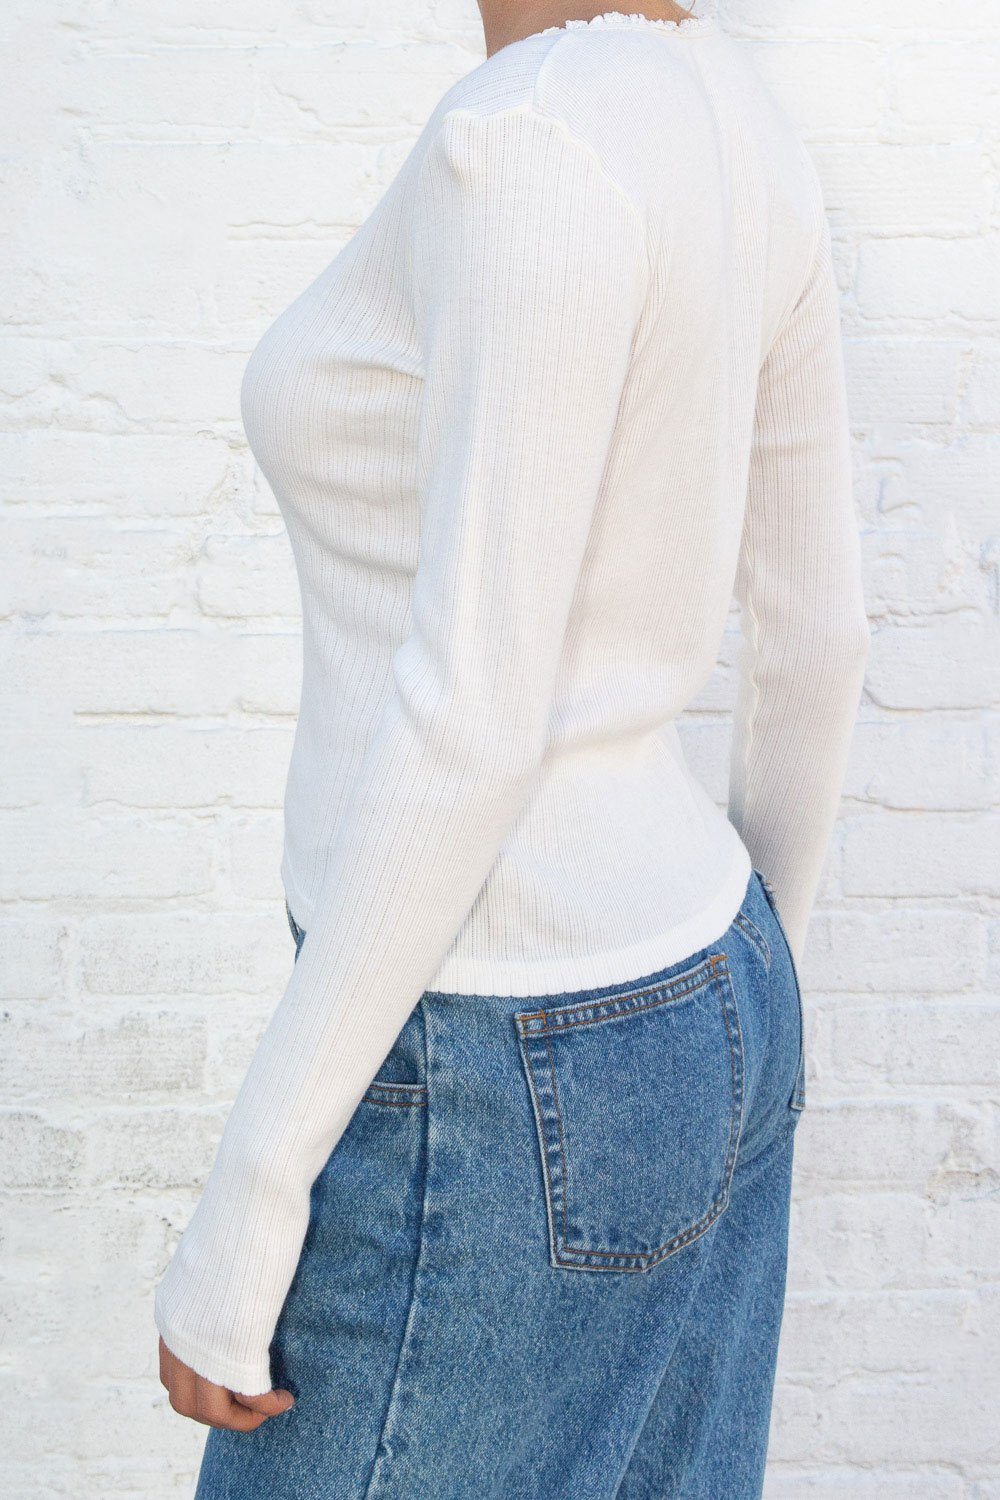 Brandy Melville Ribbed Button Up Top